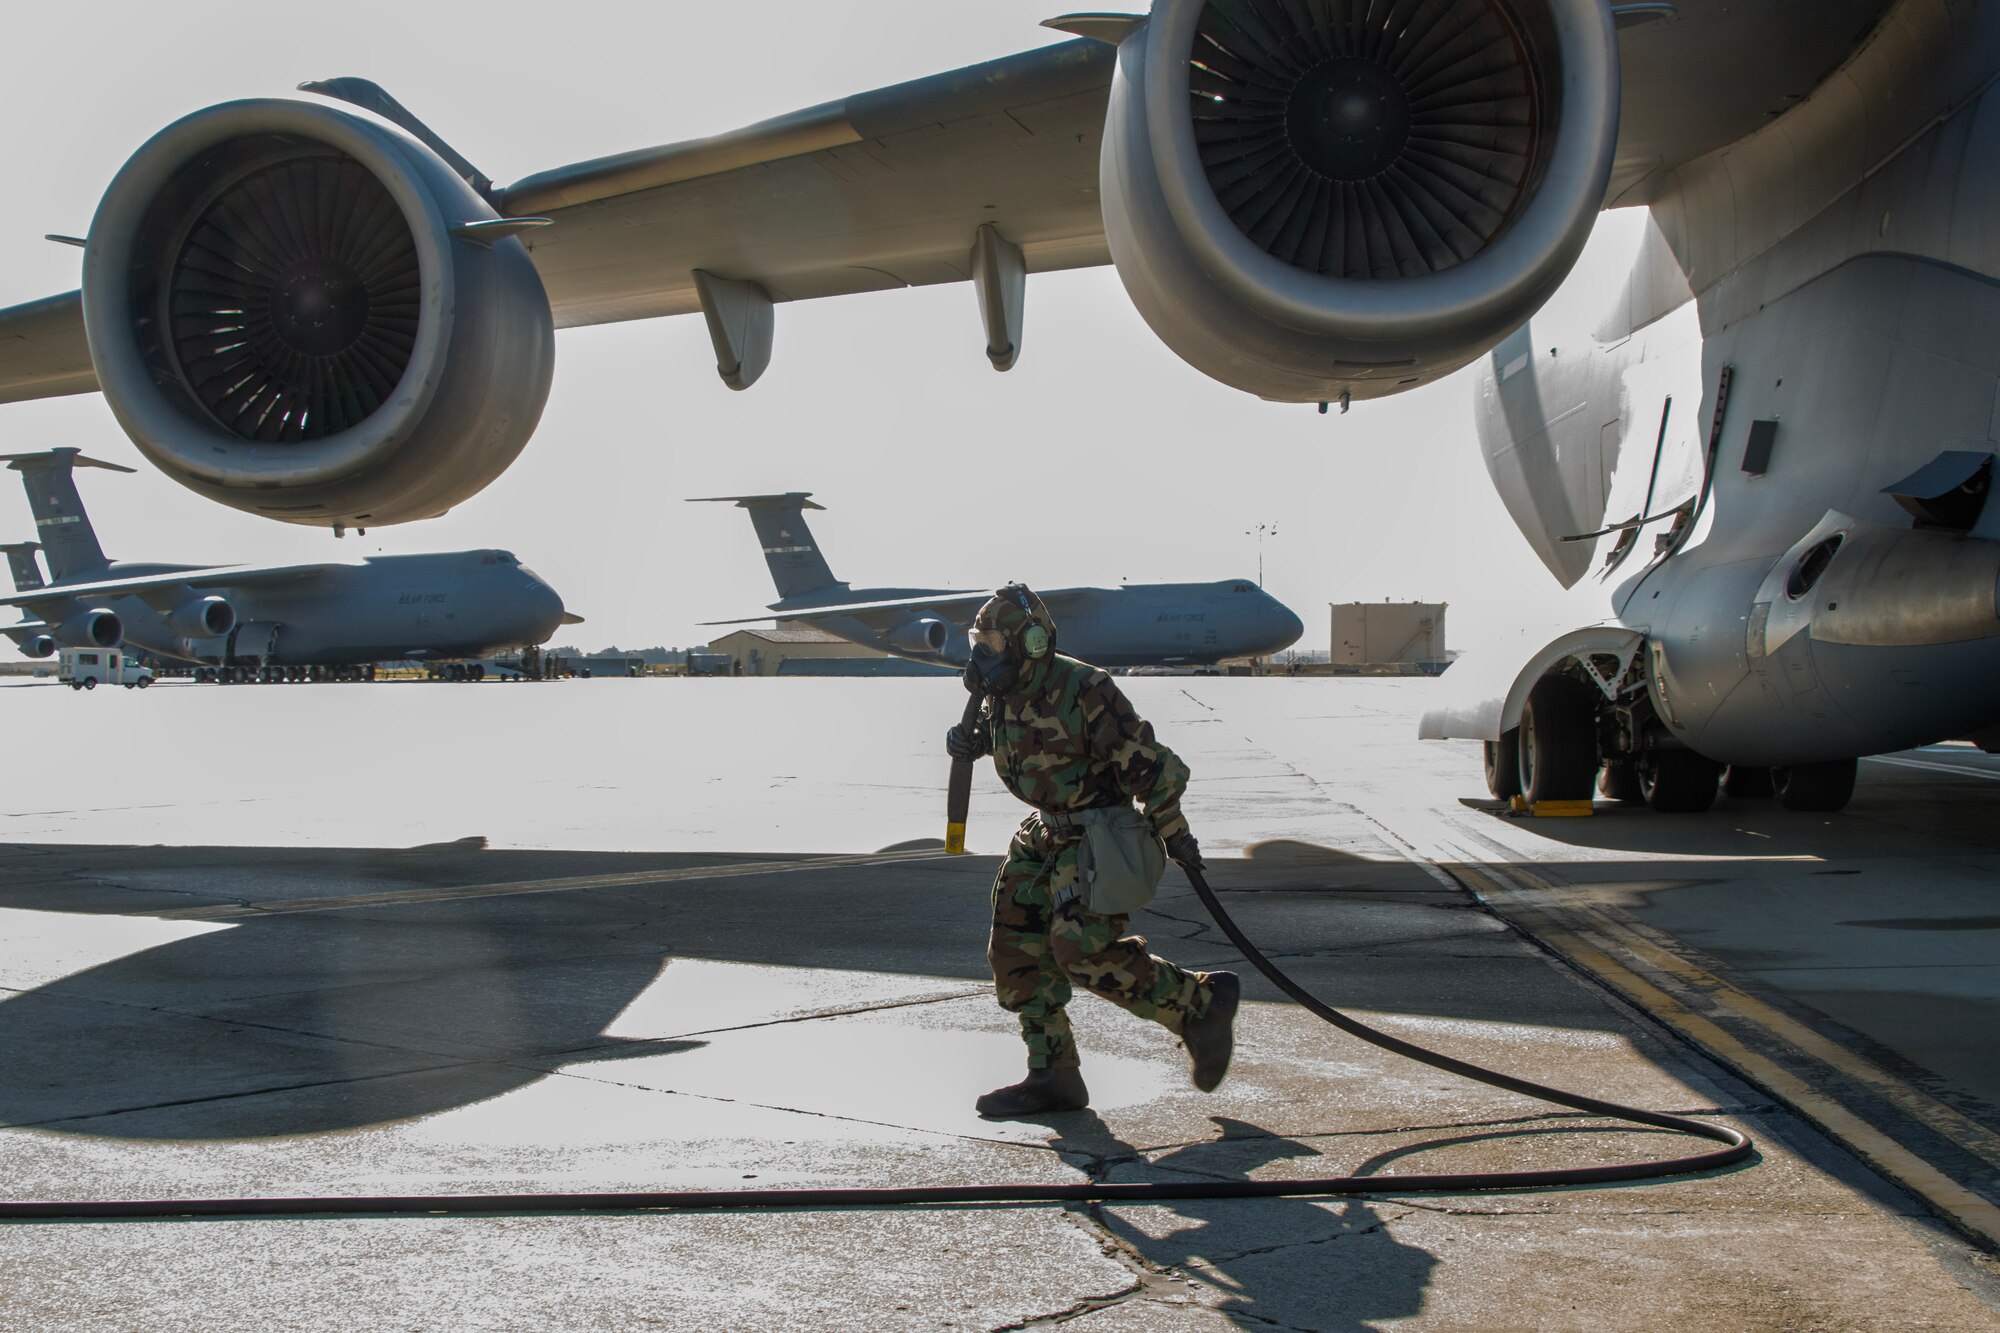 Airman walks away from aircraft holding  power cable.